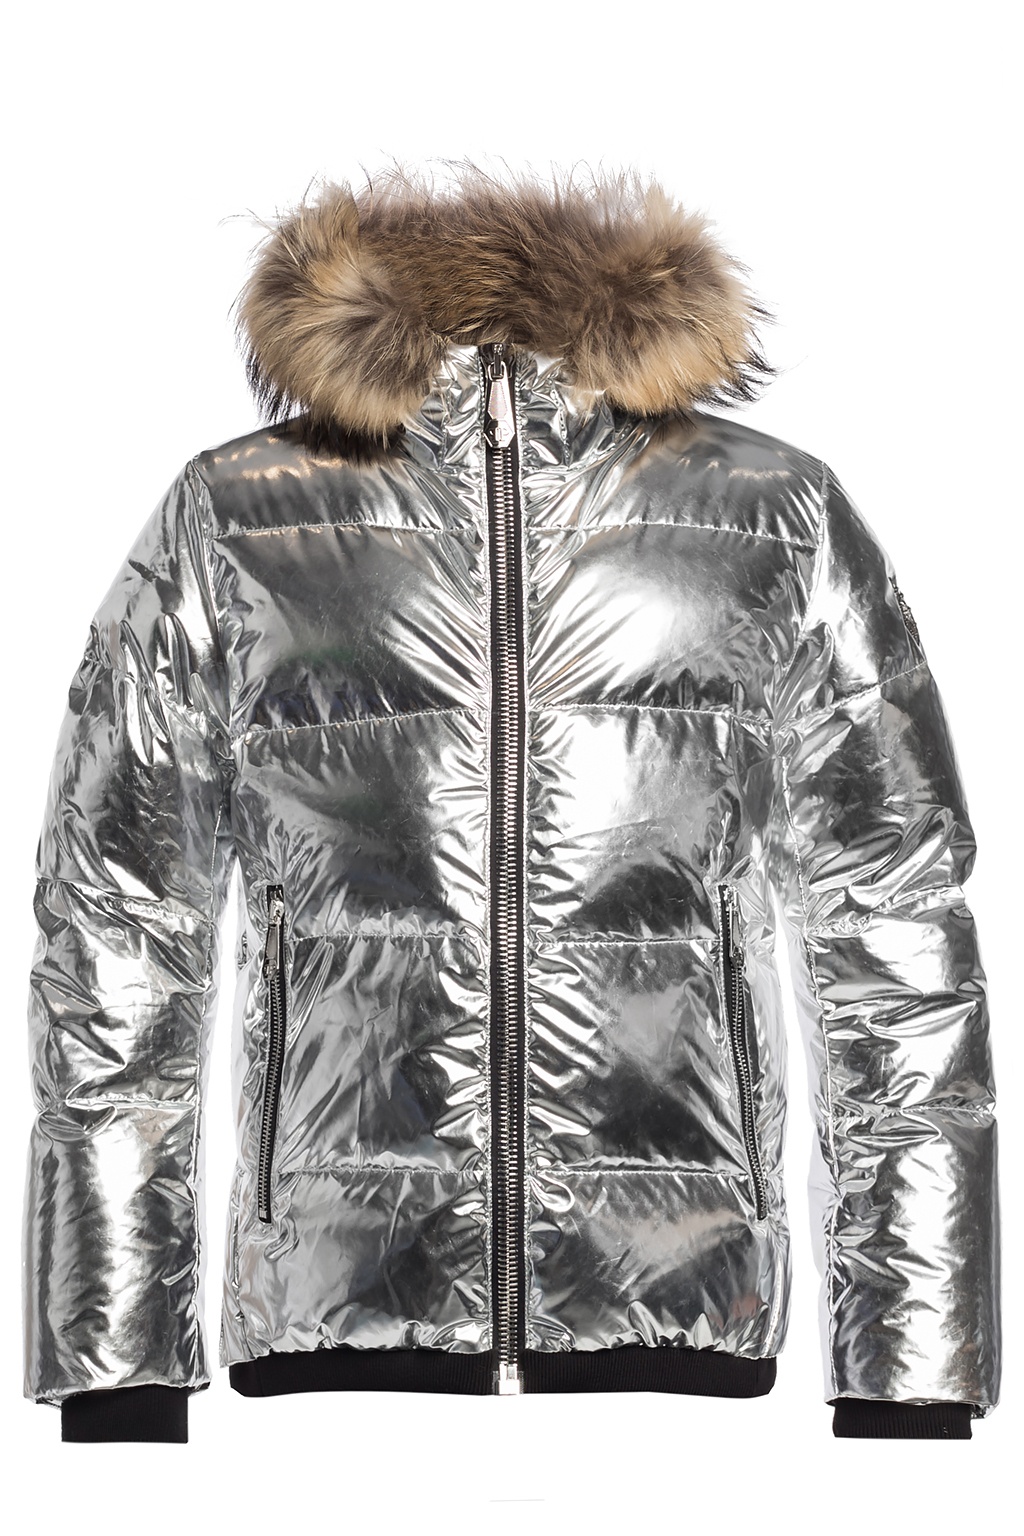 To deal with Exercise Upward Quilted down jacket Philipp Plein - Vitkac KR